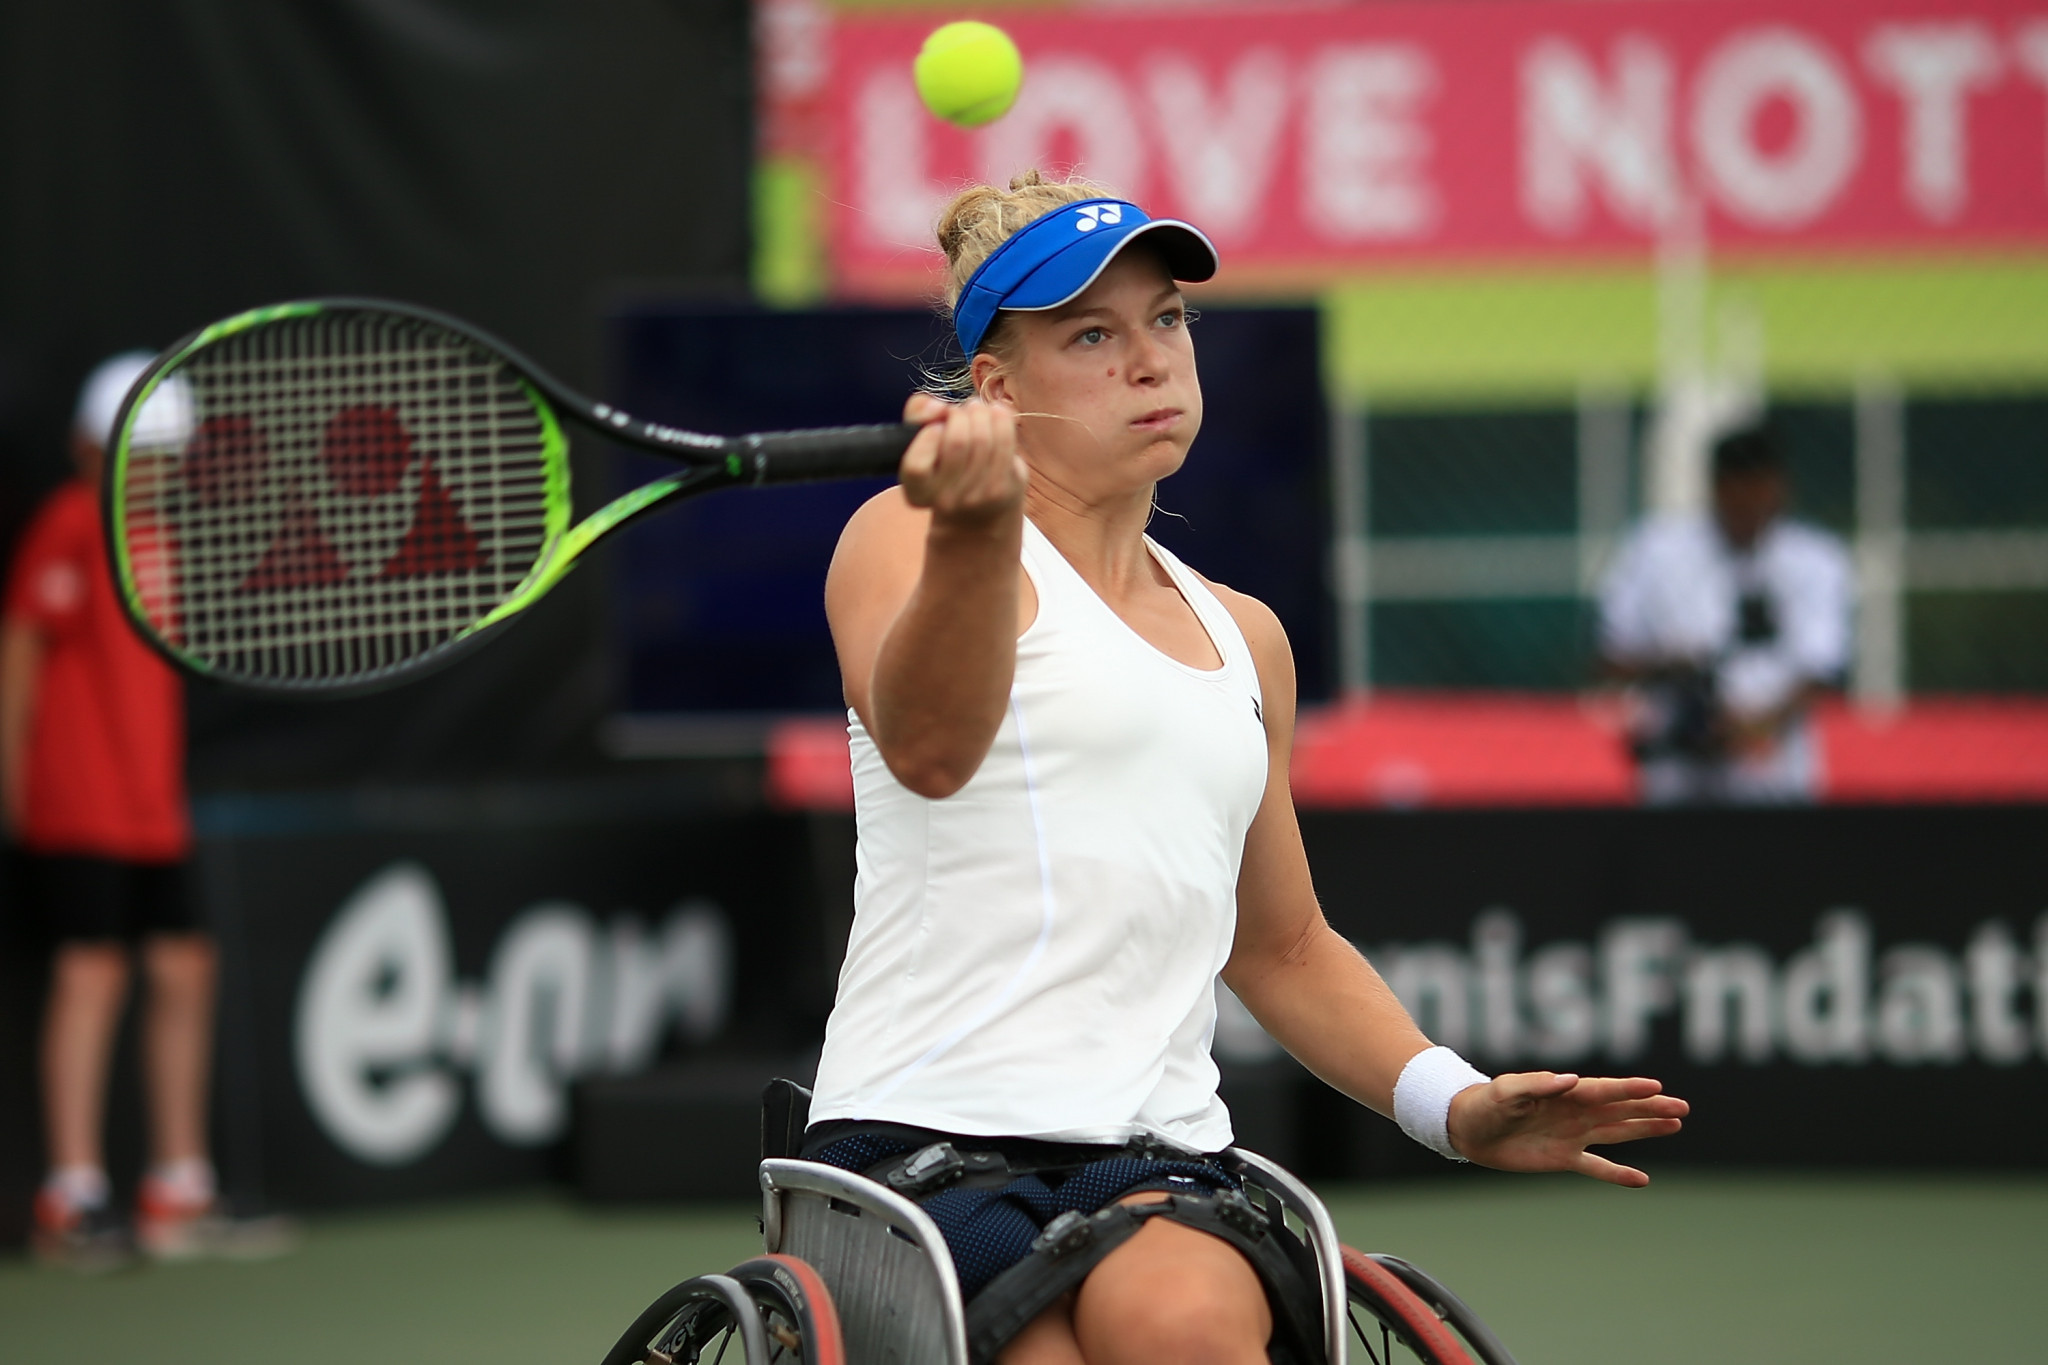 De Groot eases through at US Open Wheelchair Championships